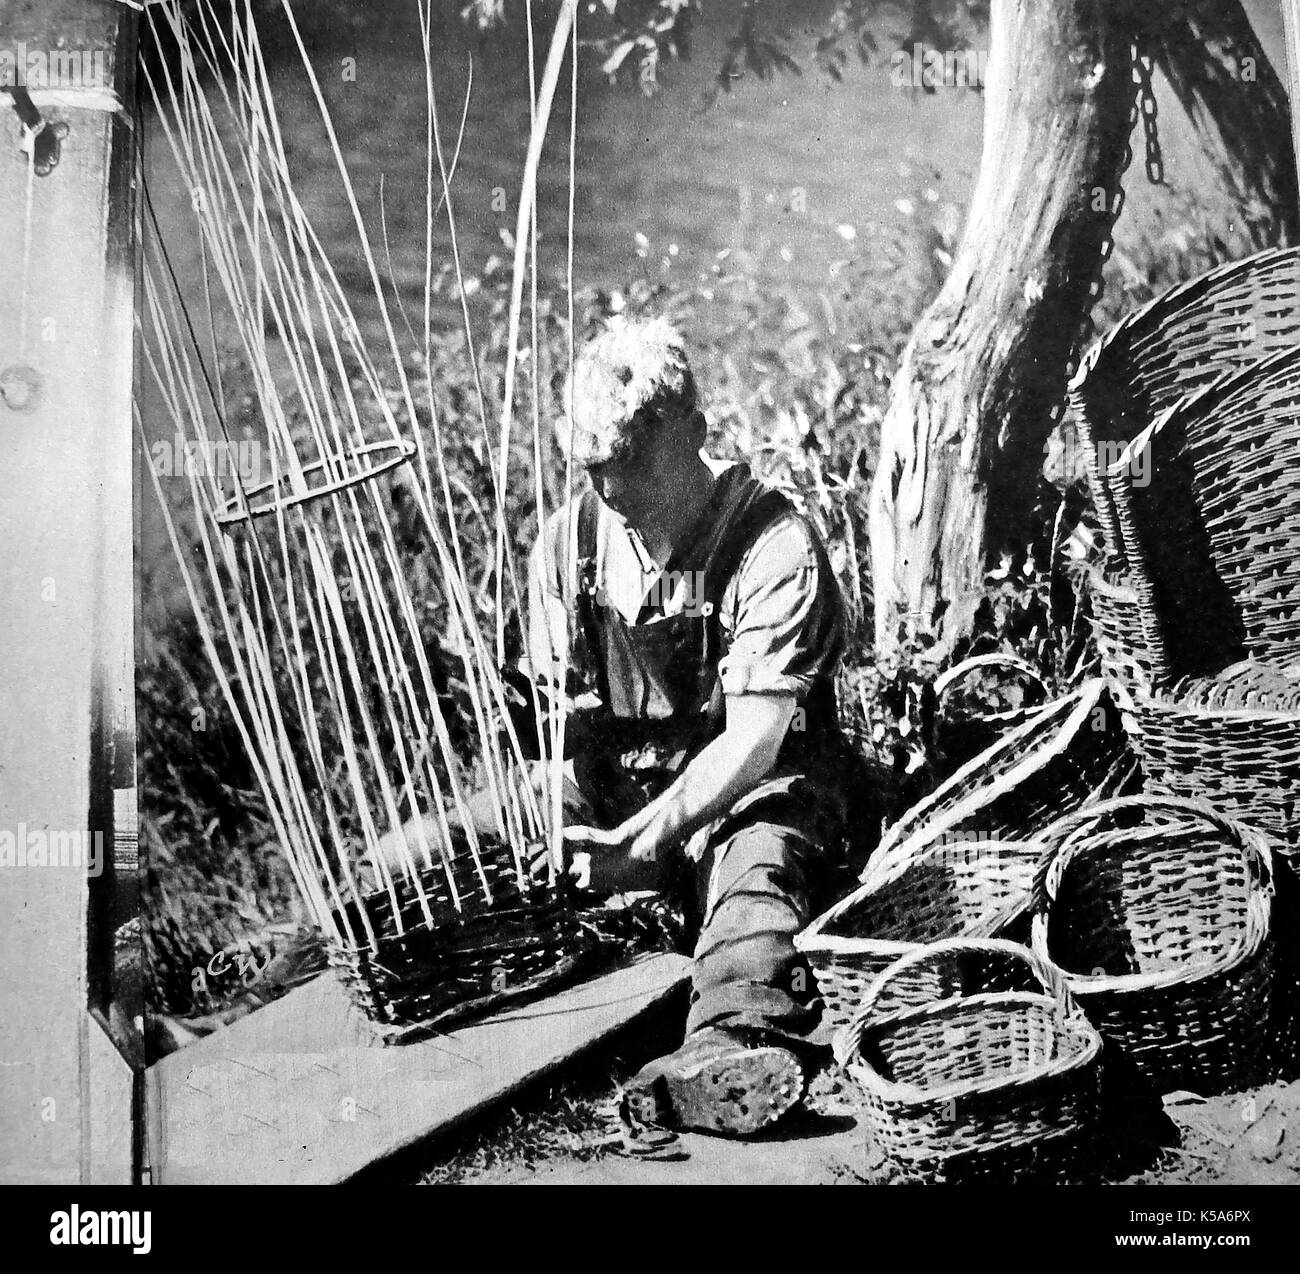 A British country craftsman (Osier Weaver) making baskets - 1930's photograph. Stock Photo